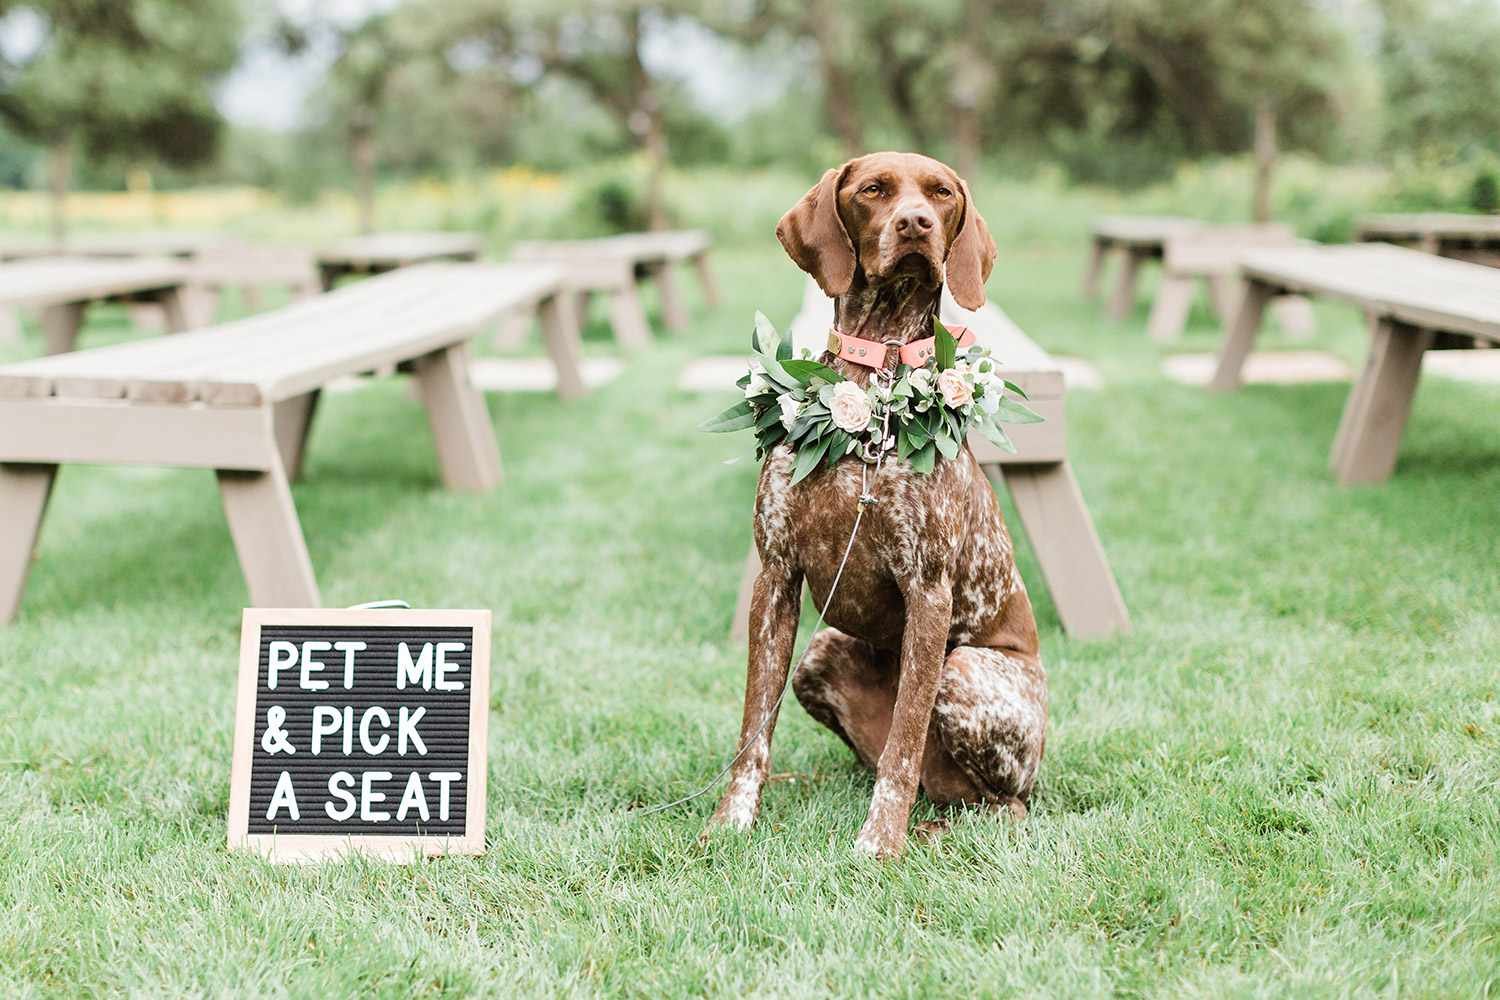 One-Third of Pet Owners Include Their Furry Friend in Their Wedding or Engagement, Survey Finds